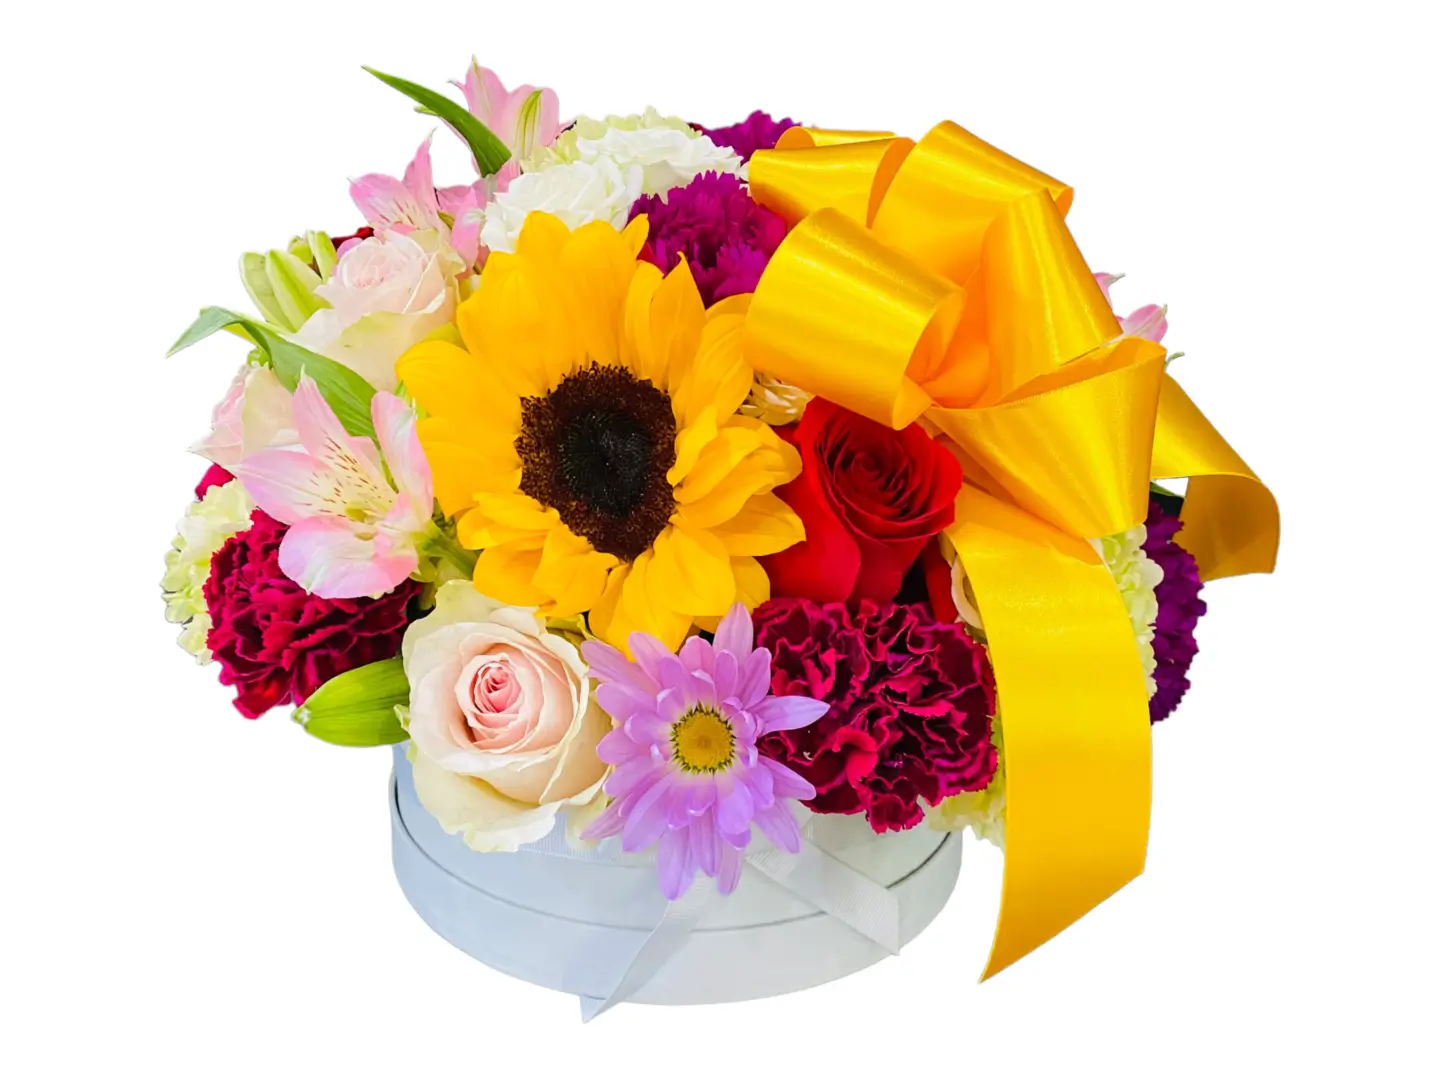 Bright colors in a white box with flowers